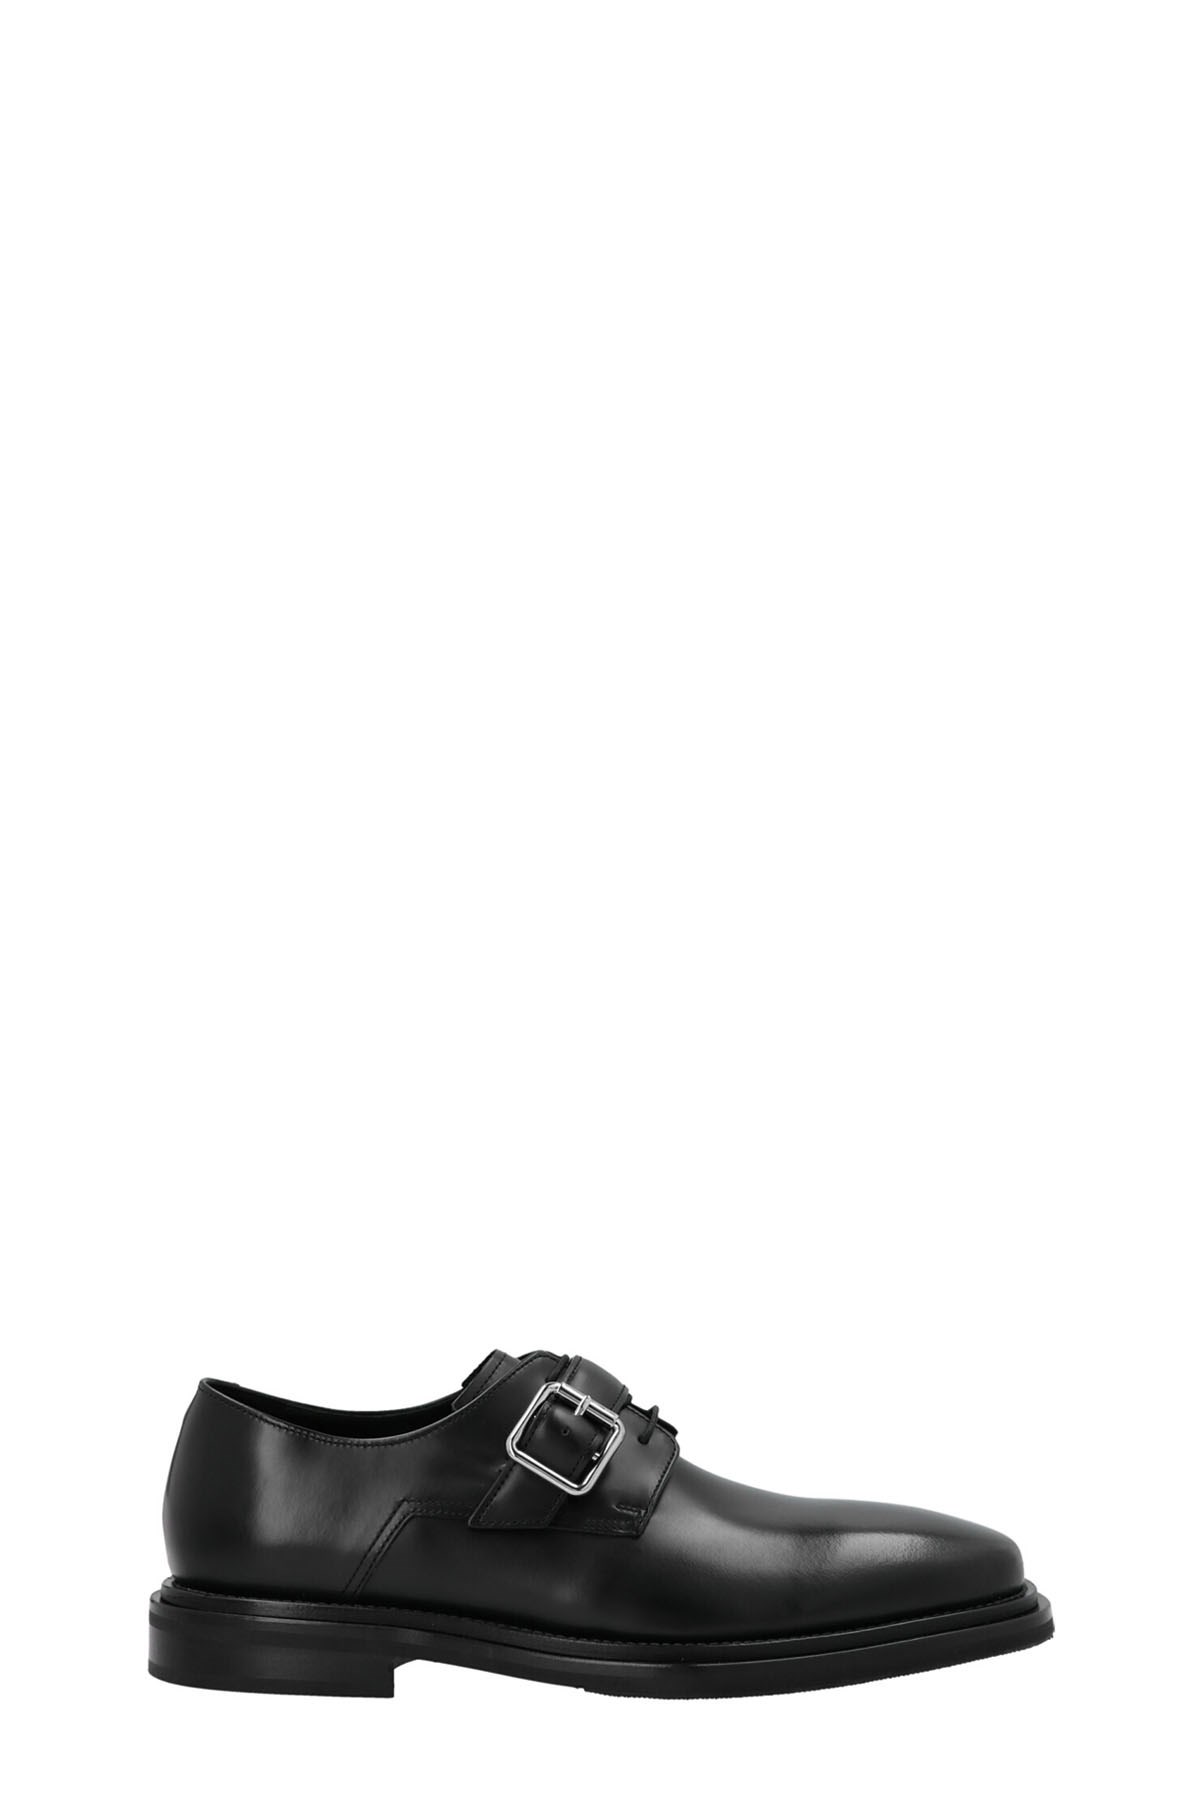 ANDERSSON BELL Square Toe Derby Shoes